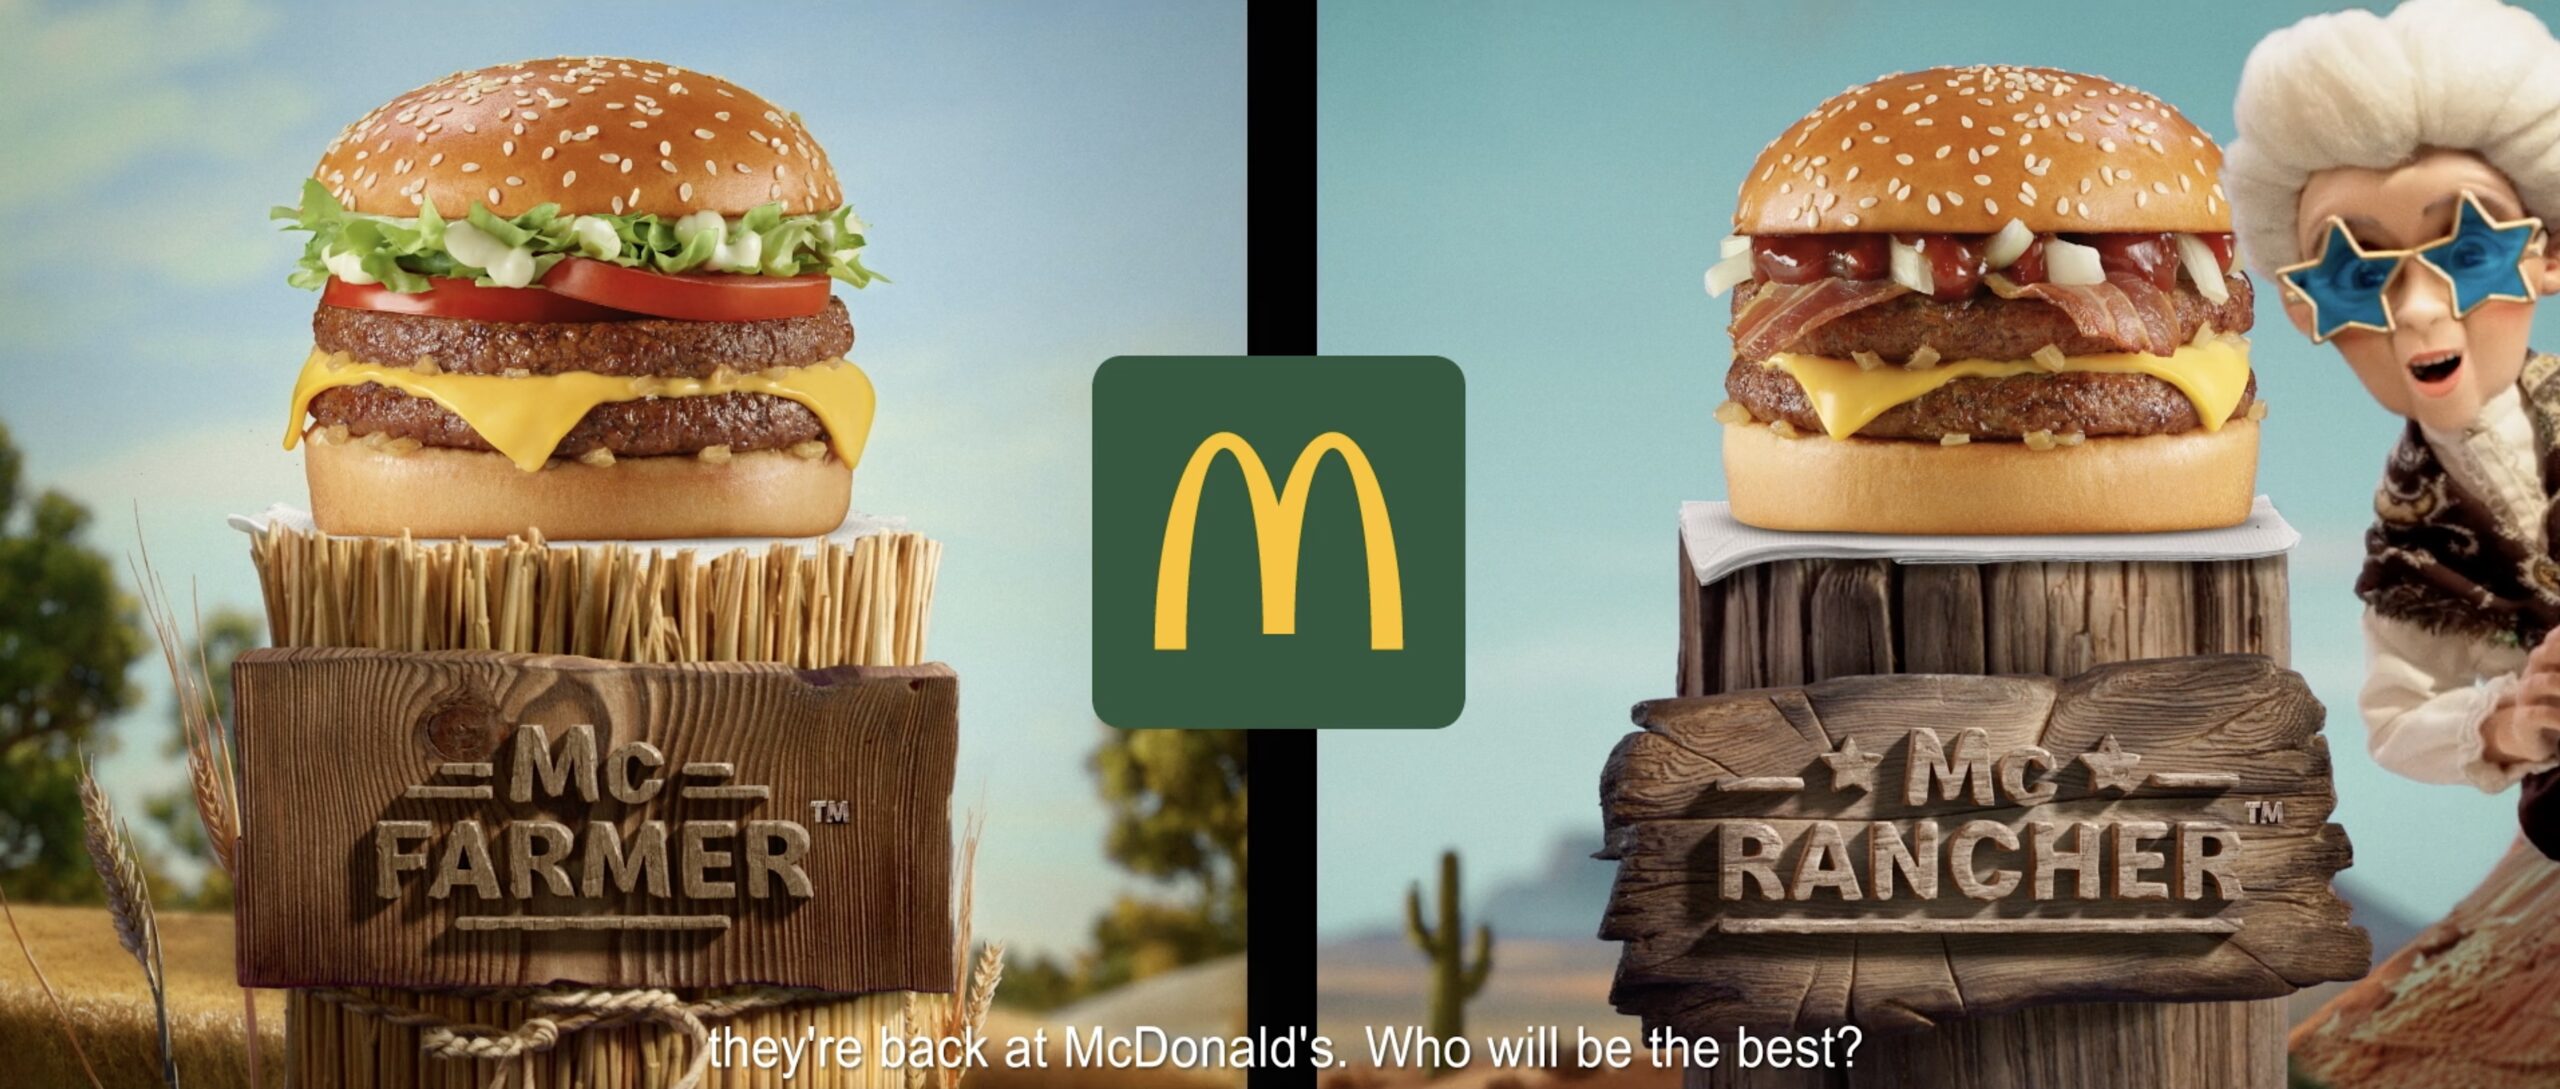 McDonald's McFarmer vs McRancher burgers campaign advertisement with logo and character in wild west outfit